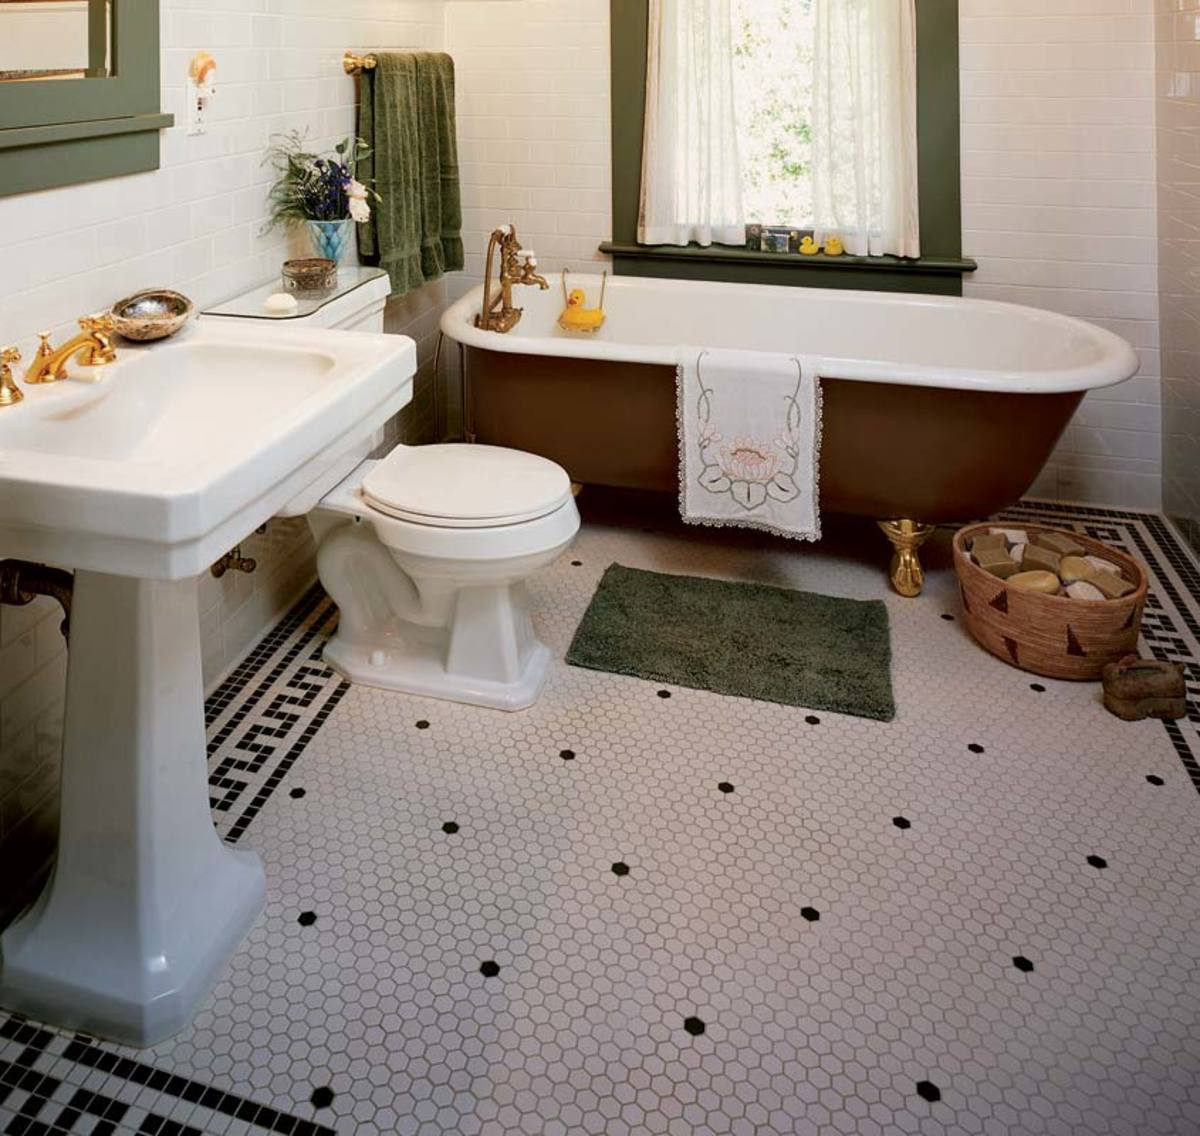 Hex Tiles Bathroom Floor
 The Floor is a Key to Style Arts & Crafts Homes and the